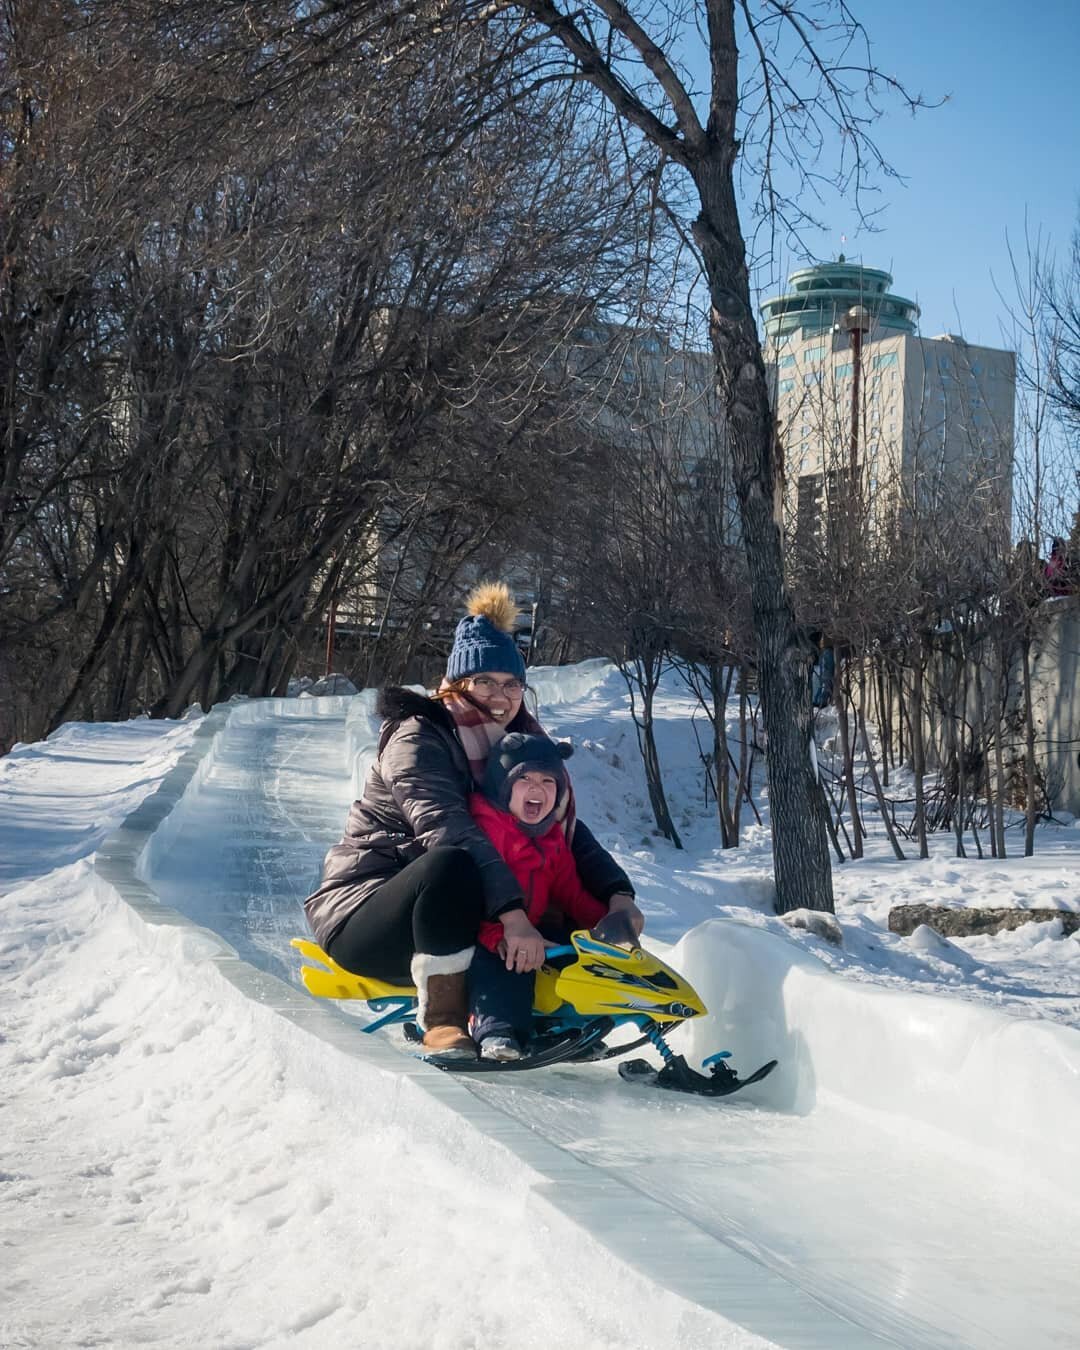 Have you been able to enjoy winter sports?⁣
Remembering the ice chute at the forks, these two had the most captivating smiles while taking this fun ride.⁣
I'm not sure if they're going to remake it this year. Have you found some fun activities this s